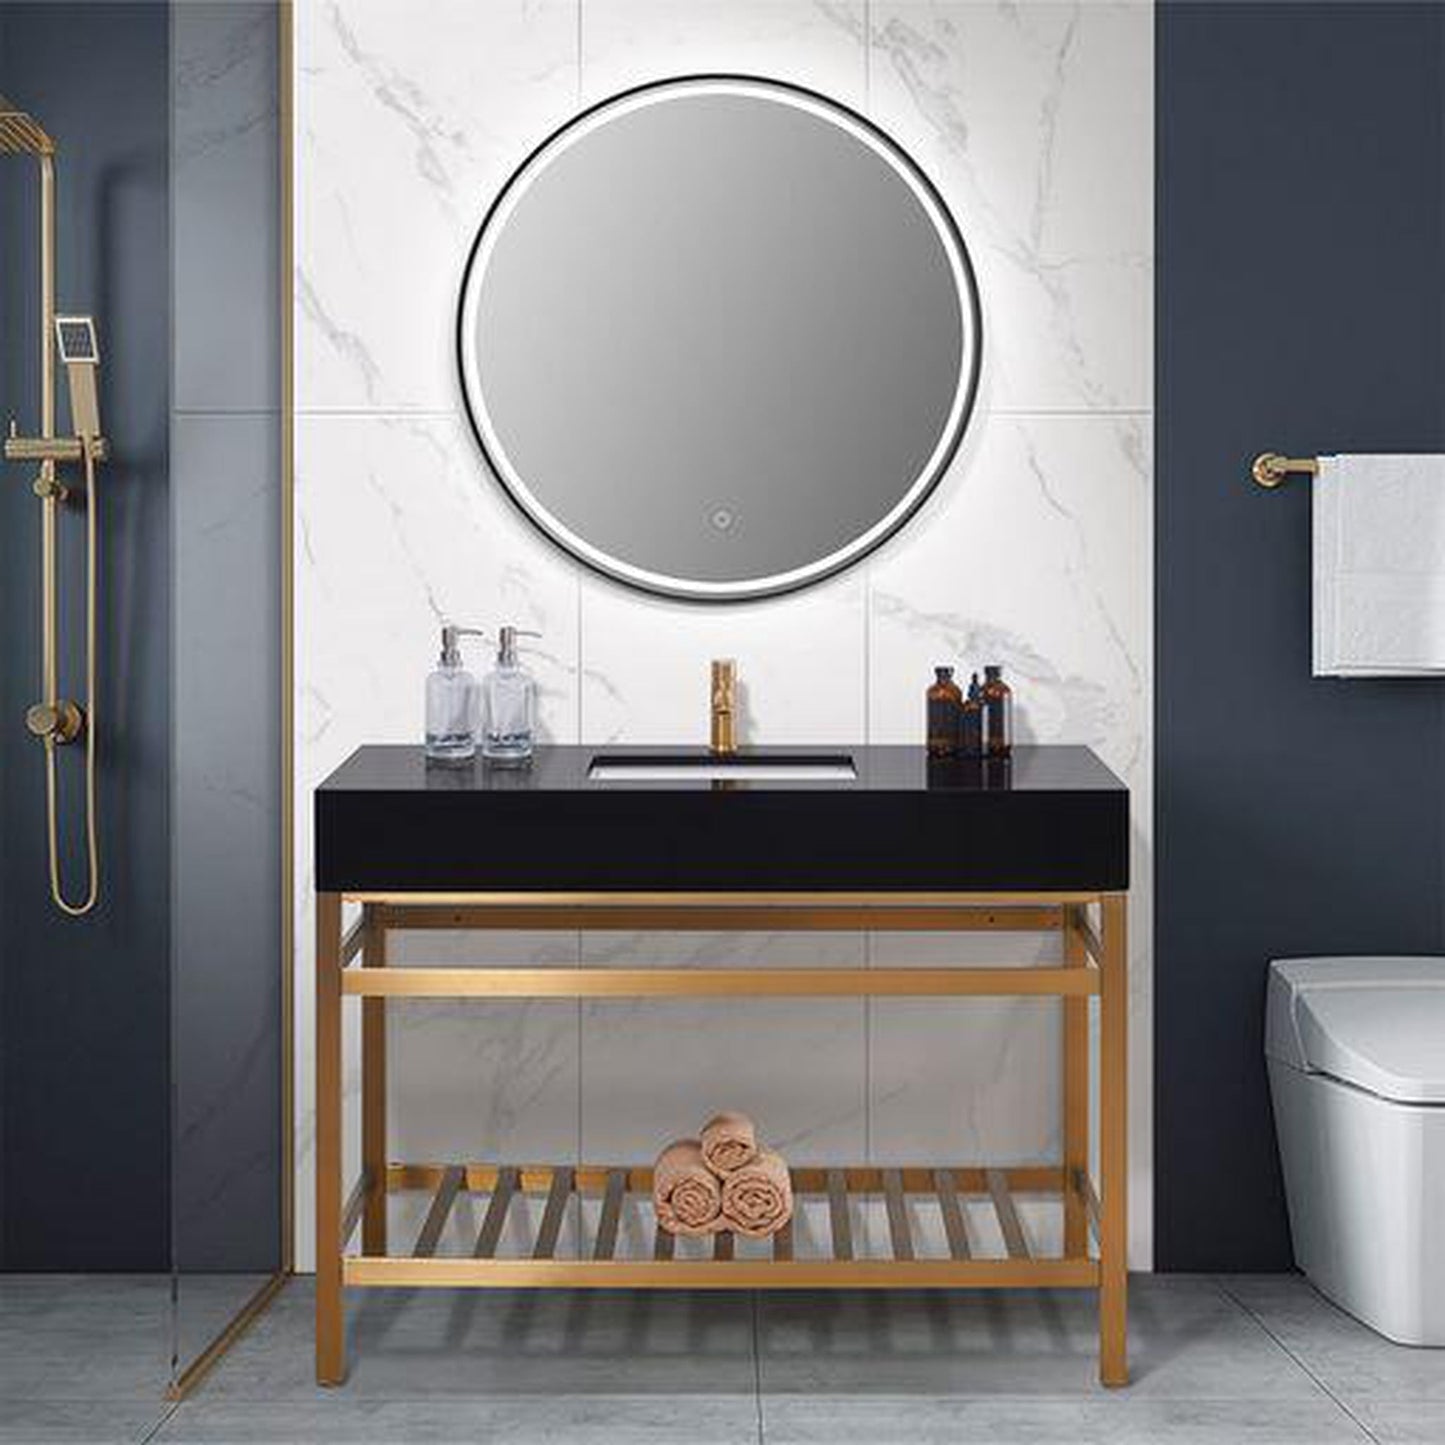 Altair Nauders 48" Brushed Gold Single Stainless Steel Bathroom Vanity Set Console With Mirror, Imperial Black Stone Top, Single Rectangular Undermount Ceramic Sink, and Safety Overflow Hole